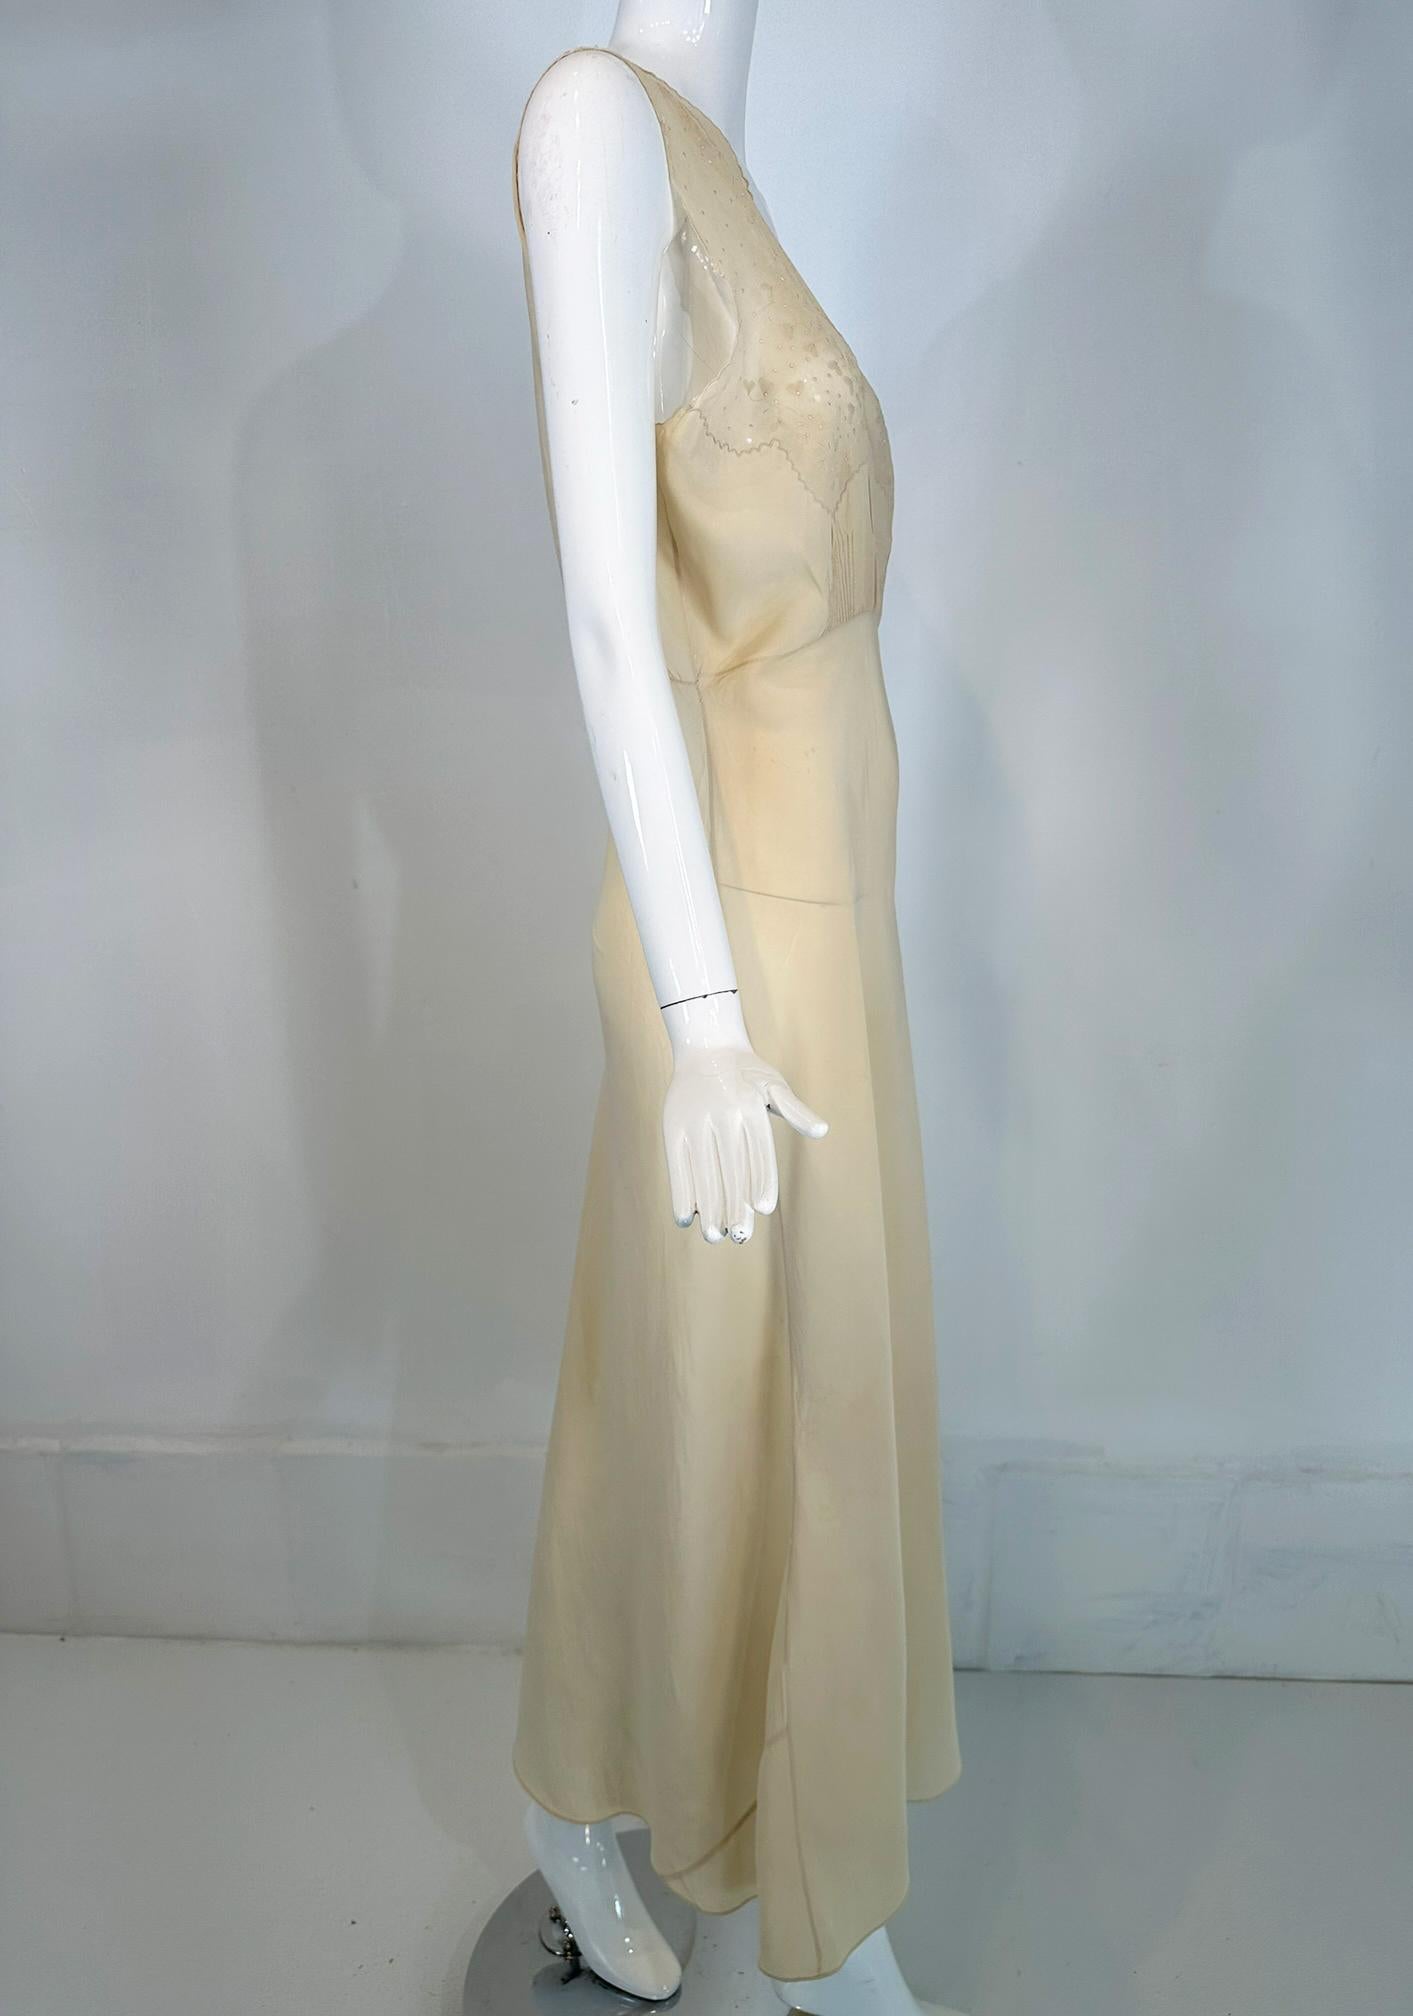 Women's 1930s Cream Bias Cut Sheer Silk Hand Embroidered & Appliqued Slip Dress Gown For Sale